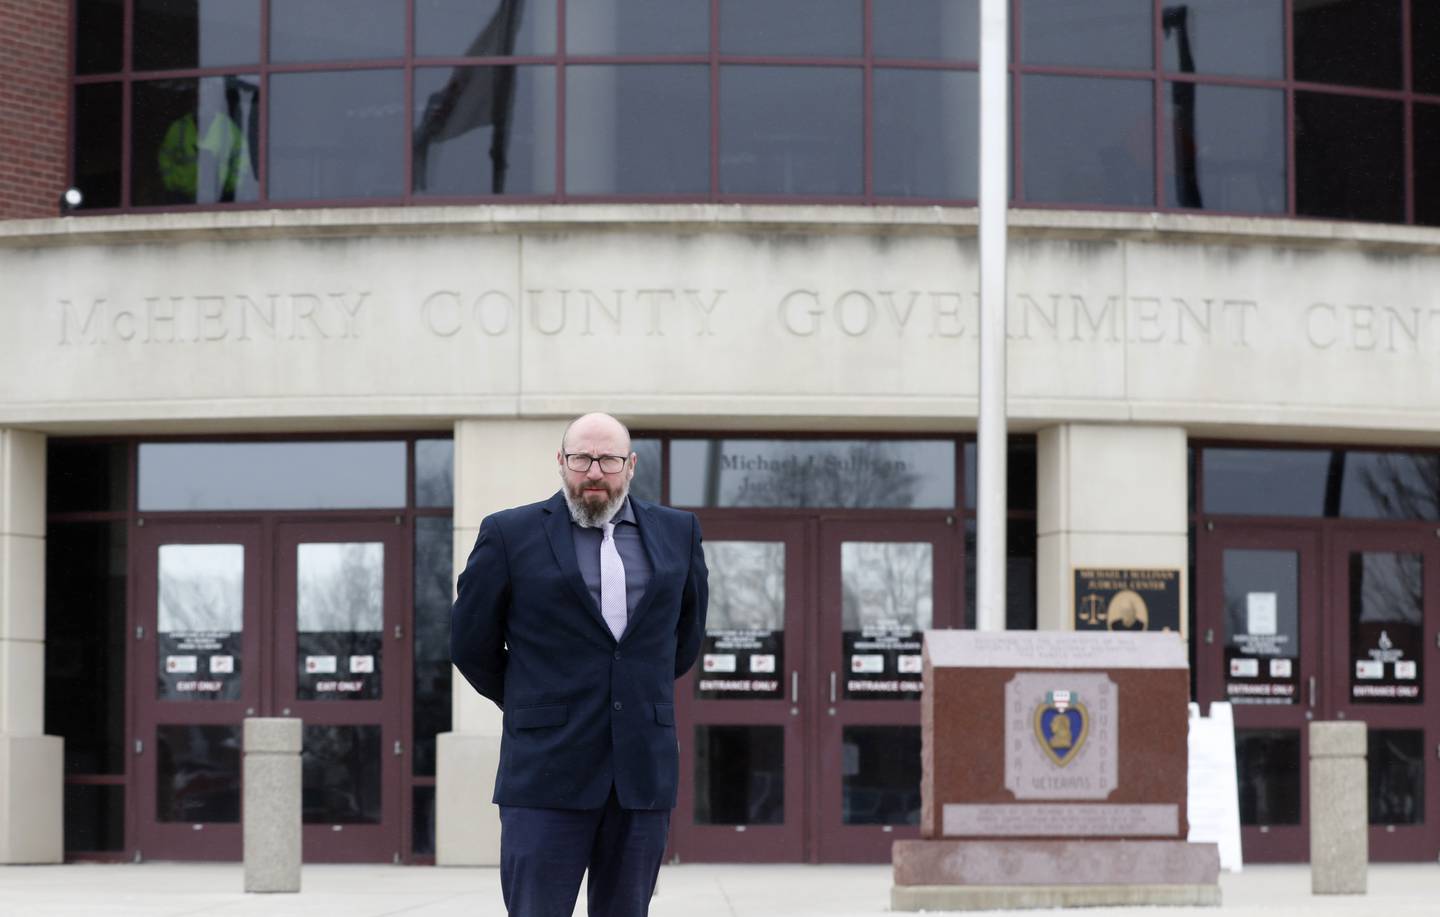 Attorney Michael Mick Combs outside the McHenry County Government Center on Wednesday, Dec. 21, 2022. Twenty years ago, 17-year-old Brian Carrick disappeared and was presumed murdered. He was last seen in the Val's Finer Foods in Johnsburg on Dec. 20, 2002. Combs was the prosecutor who tried Mario Casciaro, who was arrested and charged with murder by intimidation, but his conviction overturned on appeal.